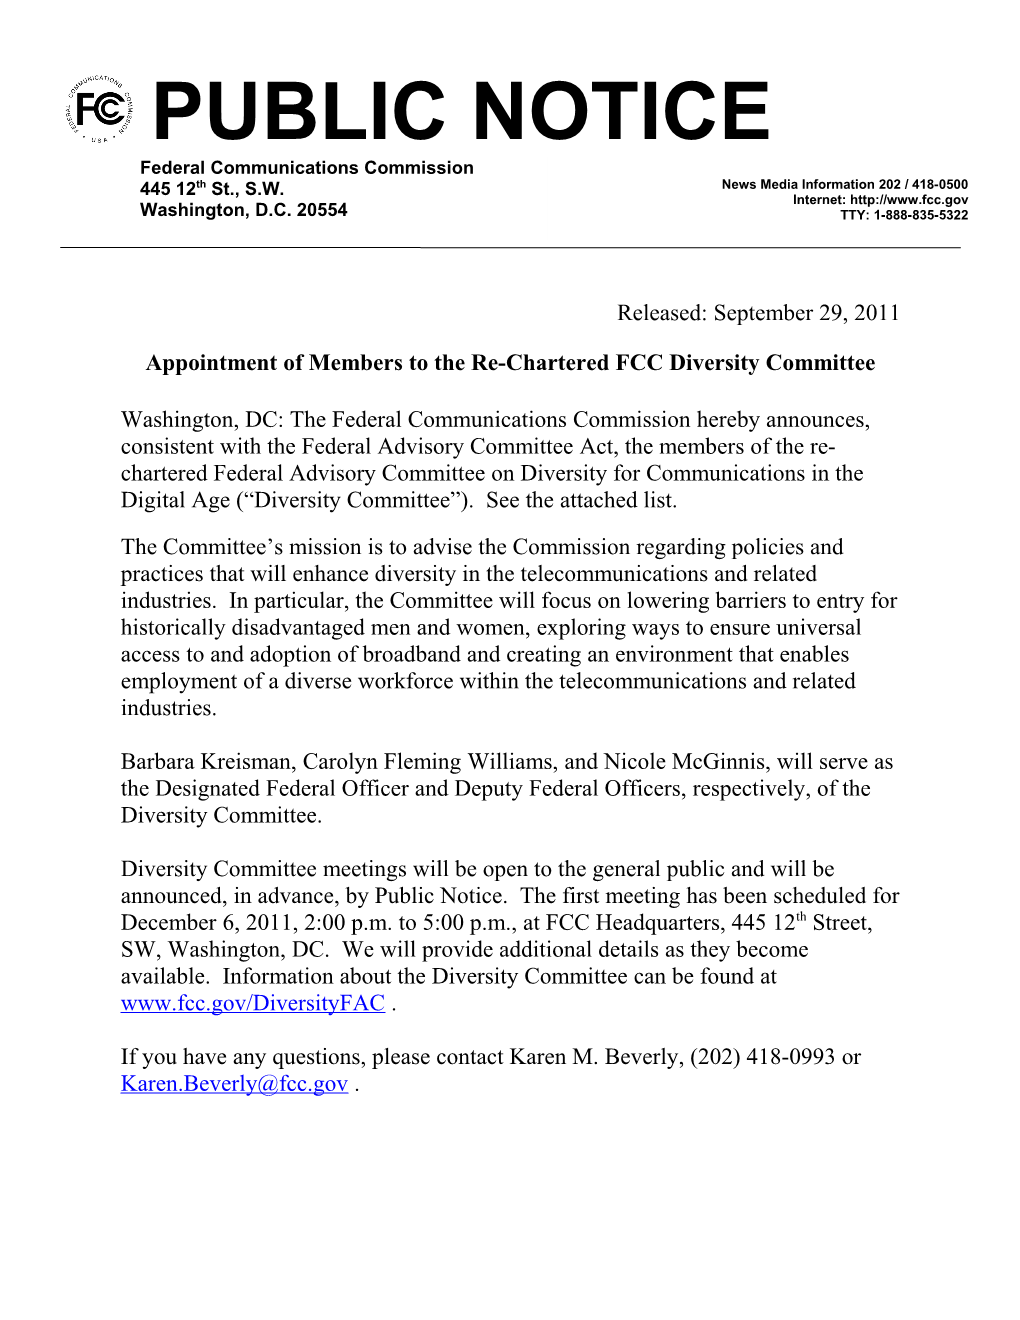 Appointment of Members to the Re-Chartered FCC Diversity Committee